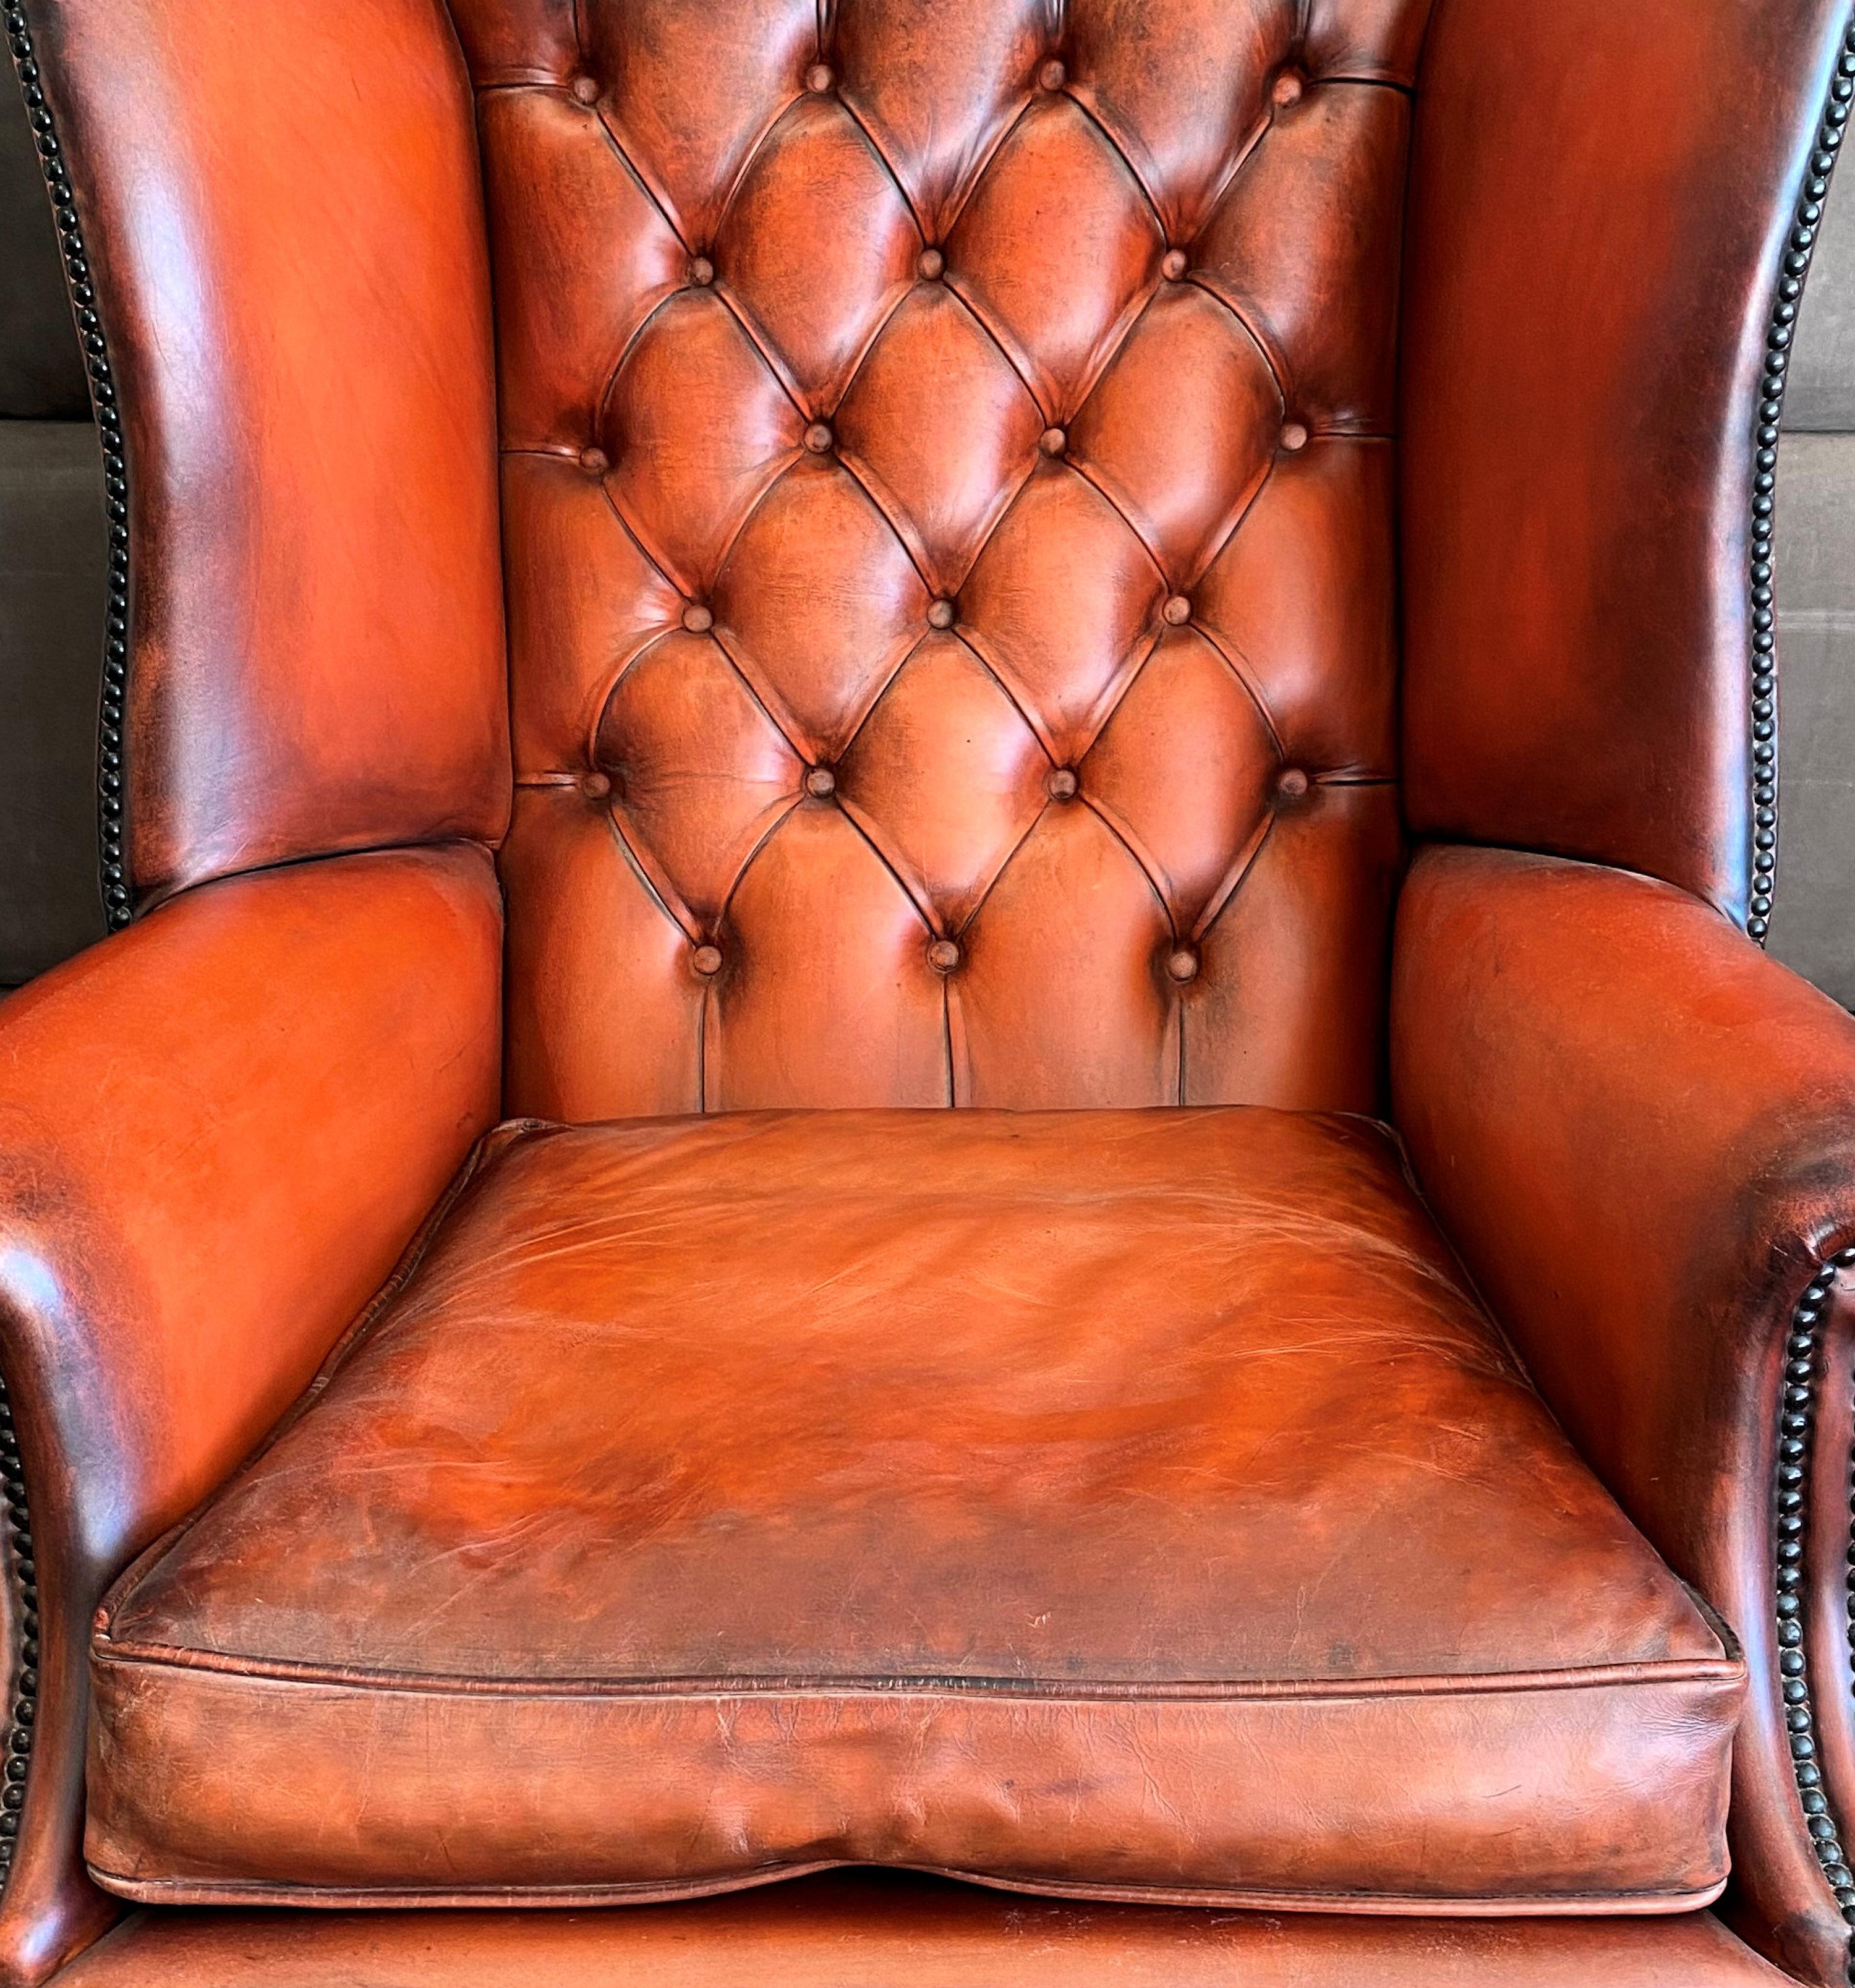 This fine quality and very handsome handmade English leather wing armchair features a ball and claw leg in the 18th century style. It has a button back and separate cushion seat made to the traditional standard. The leather is naturally worn to a